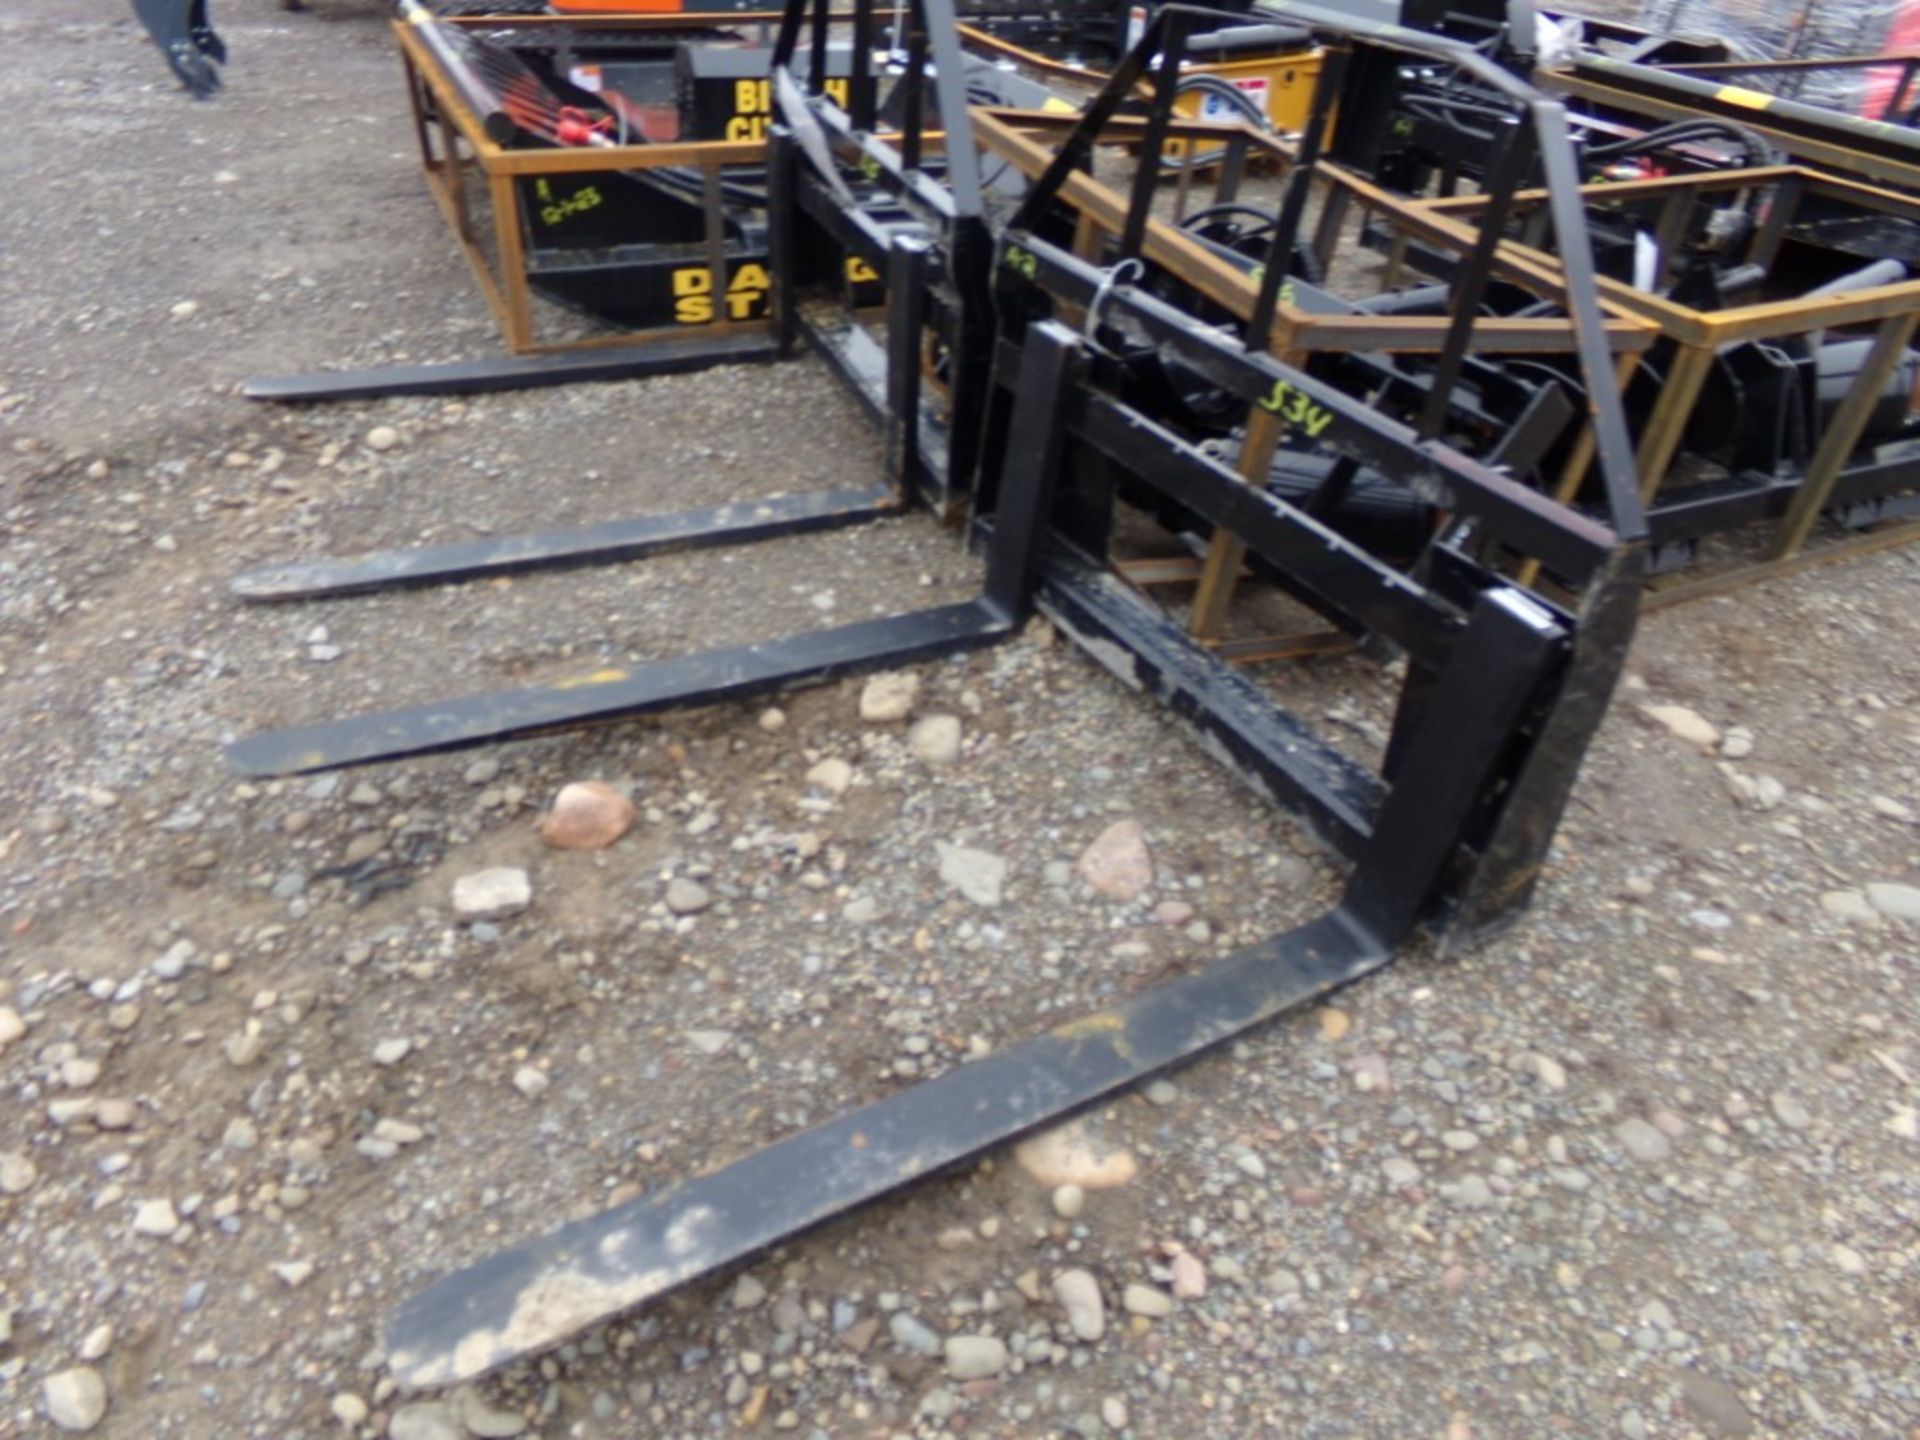 New PAII 100, 48'' Pallet Forks For SSL, Minor Damage On Top Guard